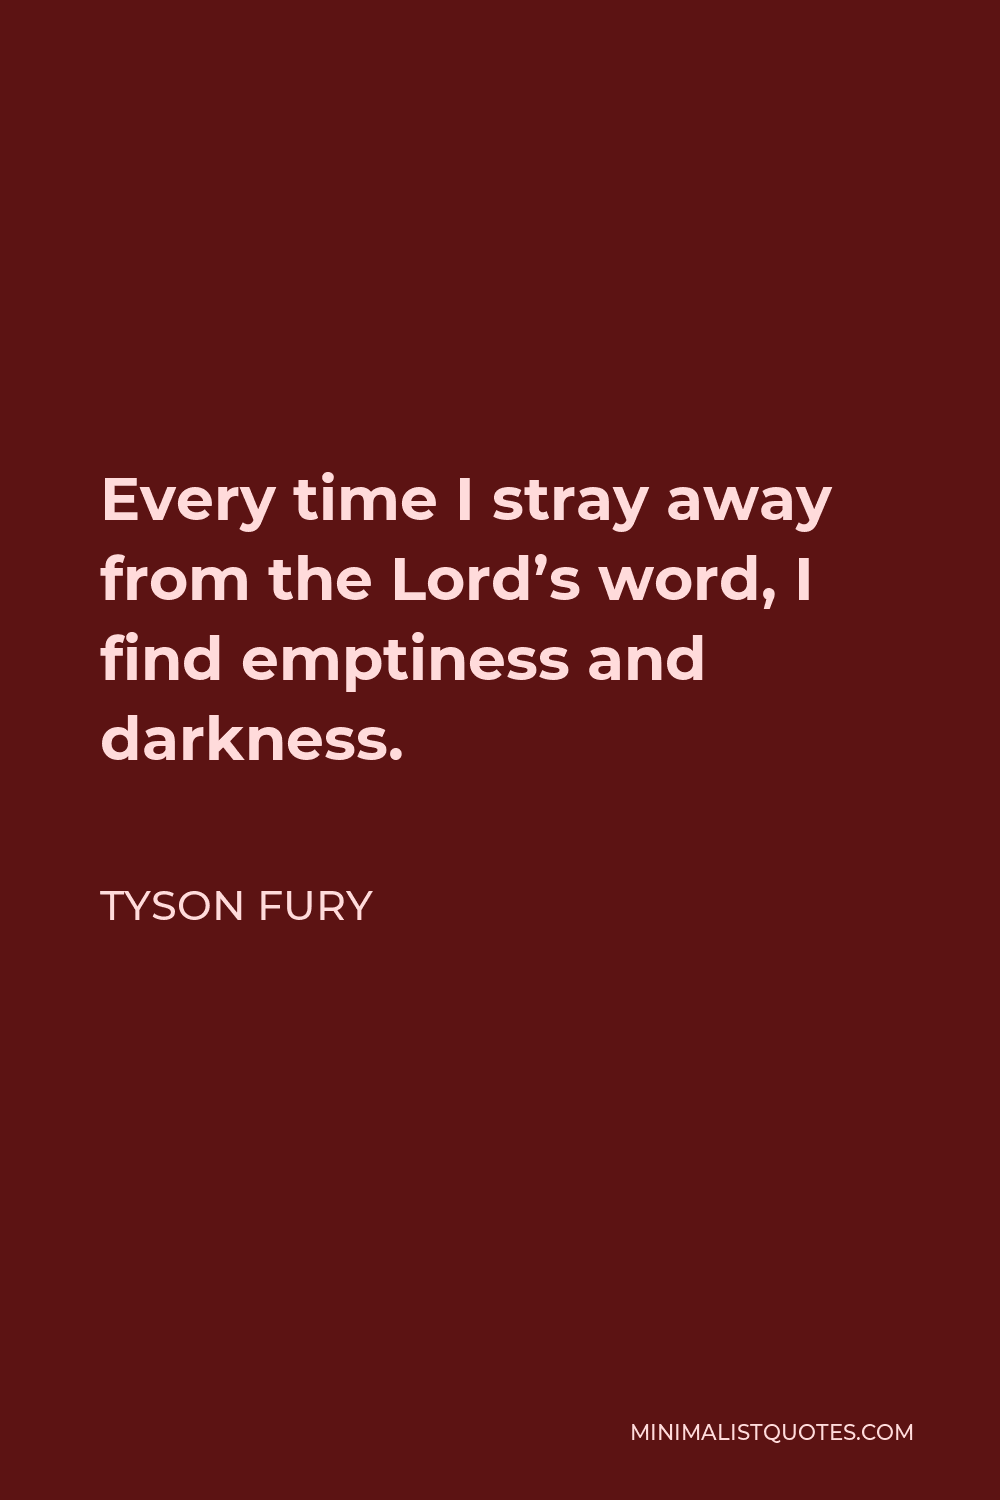 Tyson Fury Quote - Every time I stray away from the Lord’s word, I find emptiness and darkness.